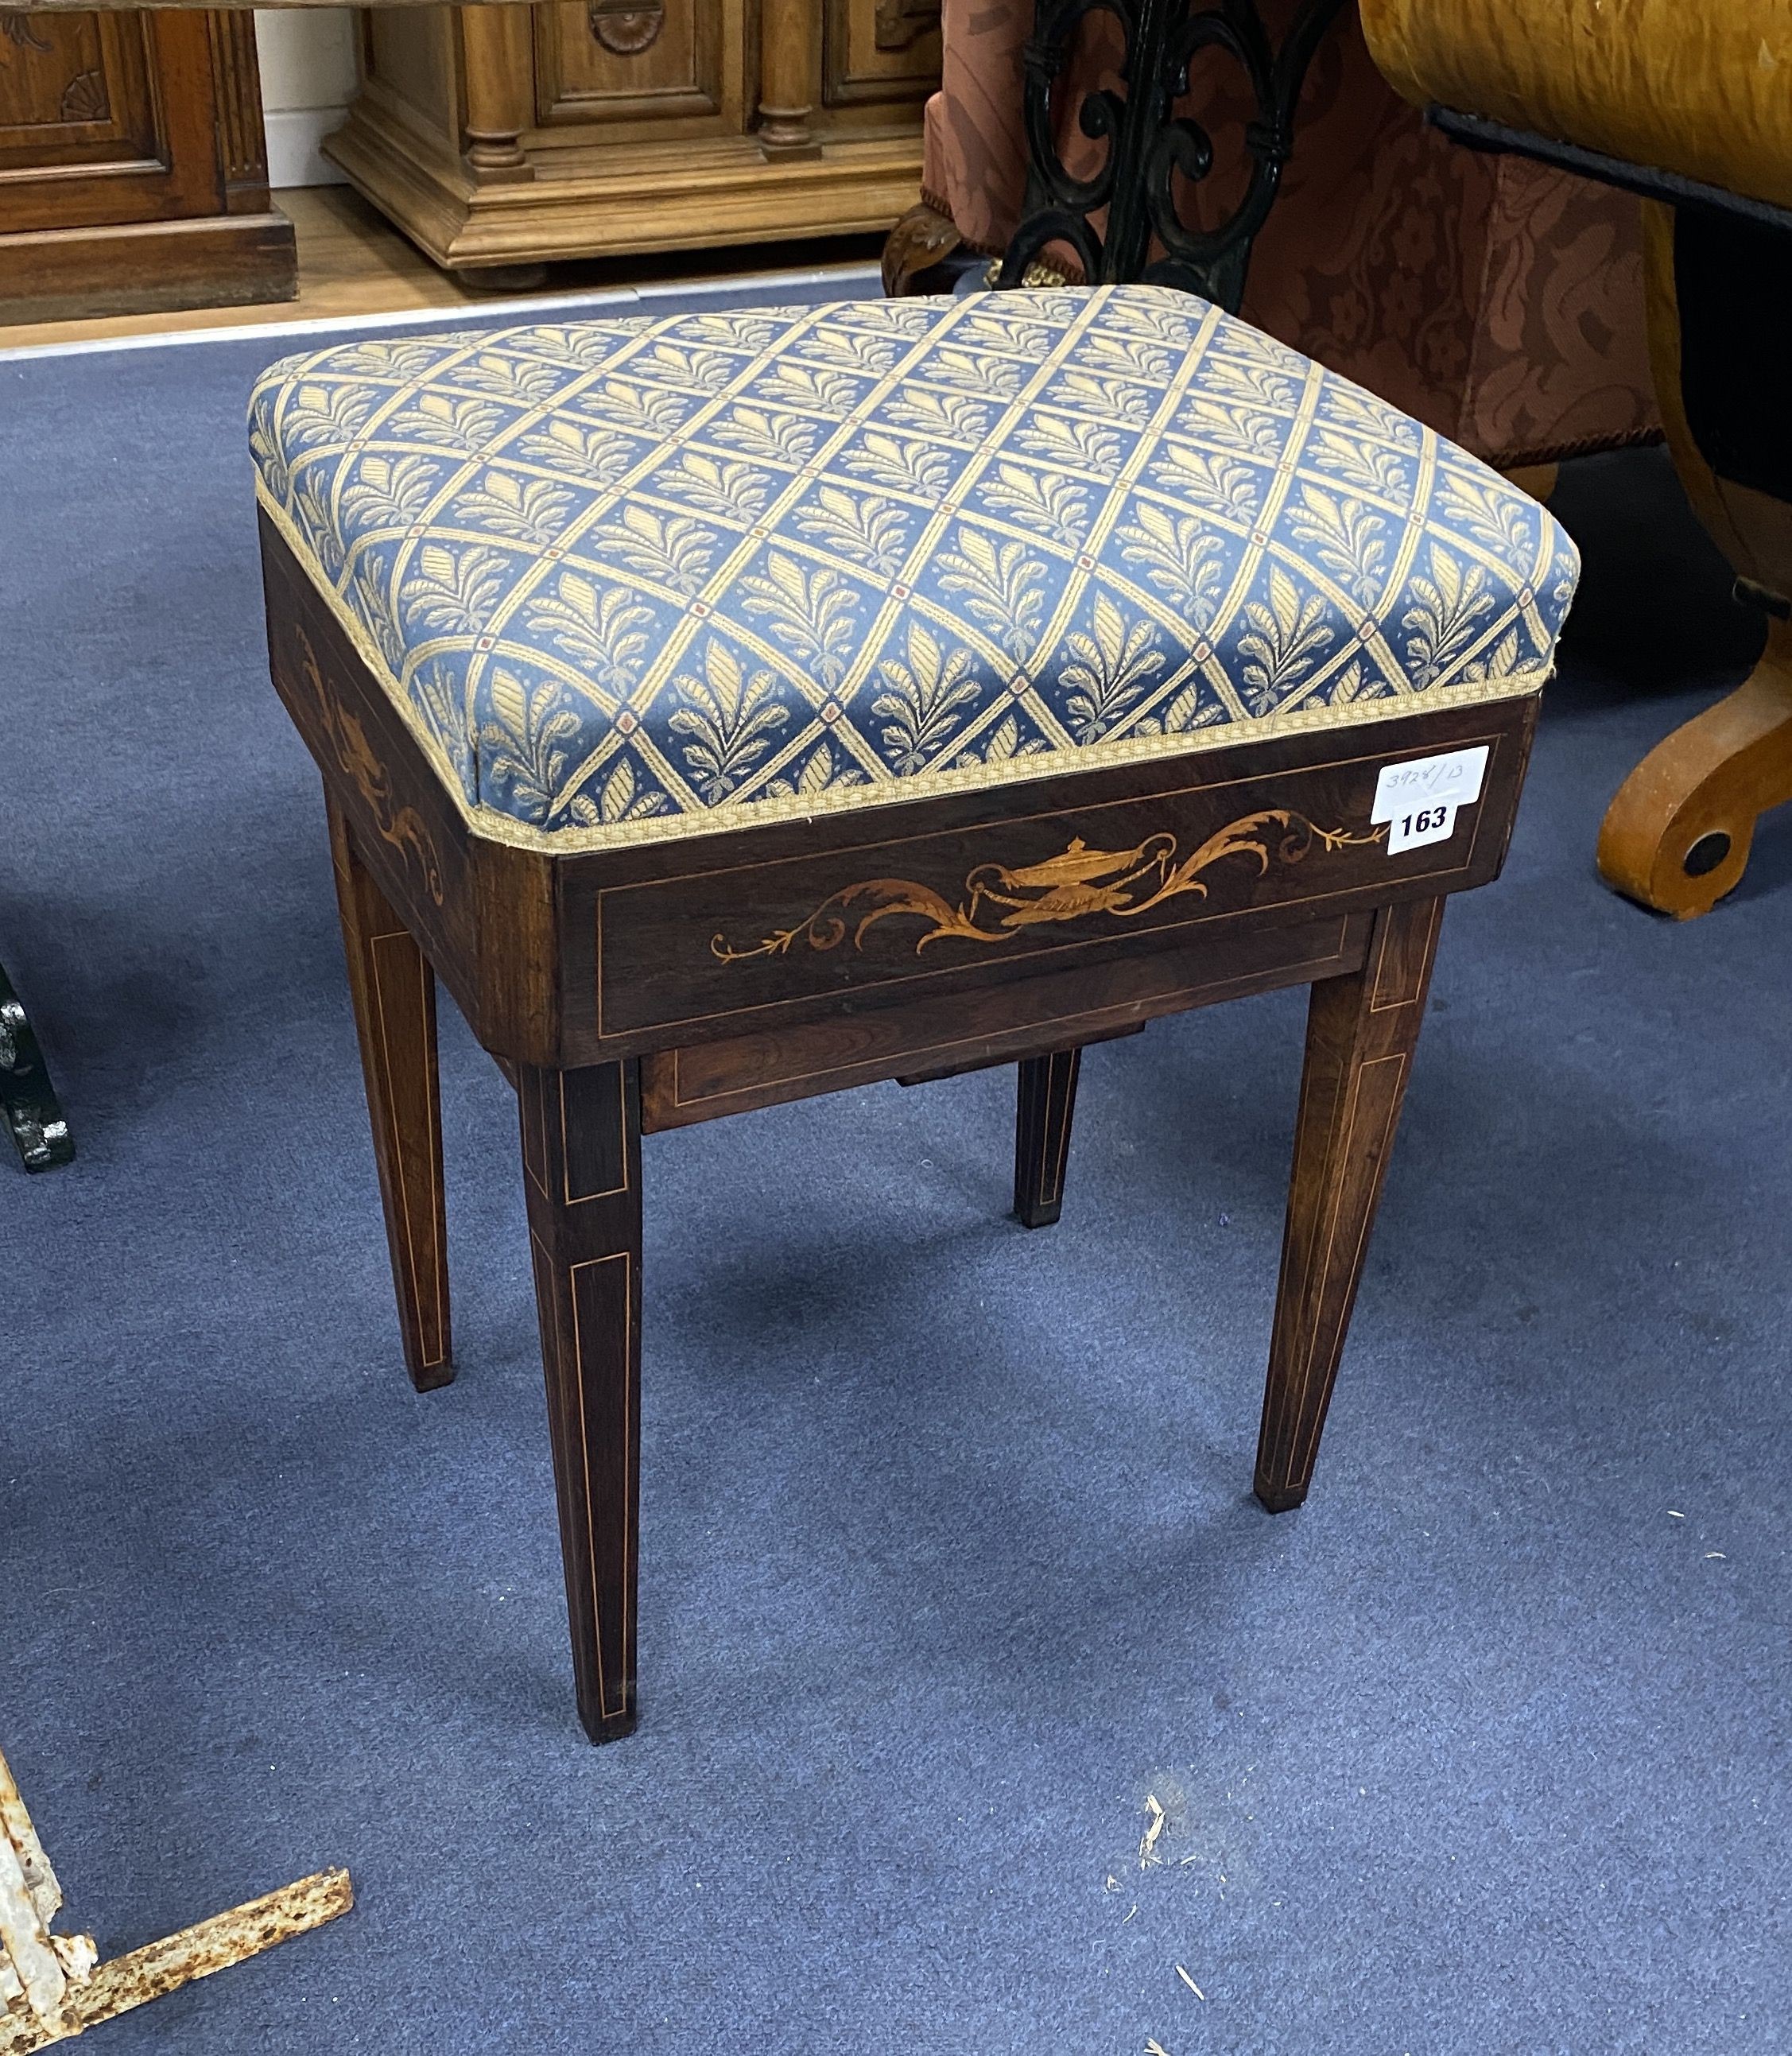 An Edwardian marquetry inlaid rosewood adjustable piano stool